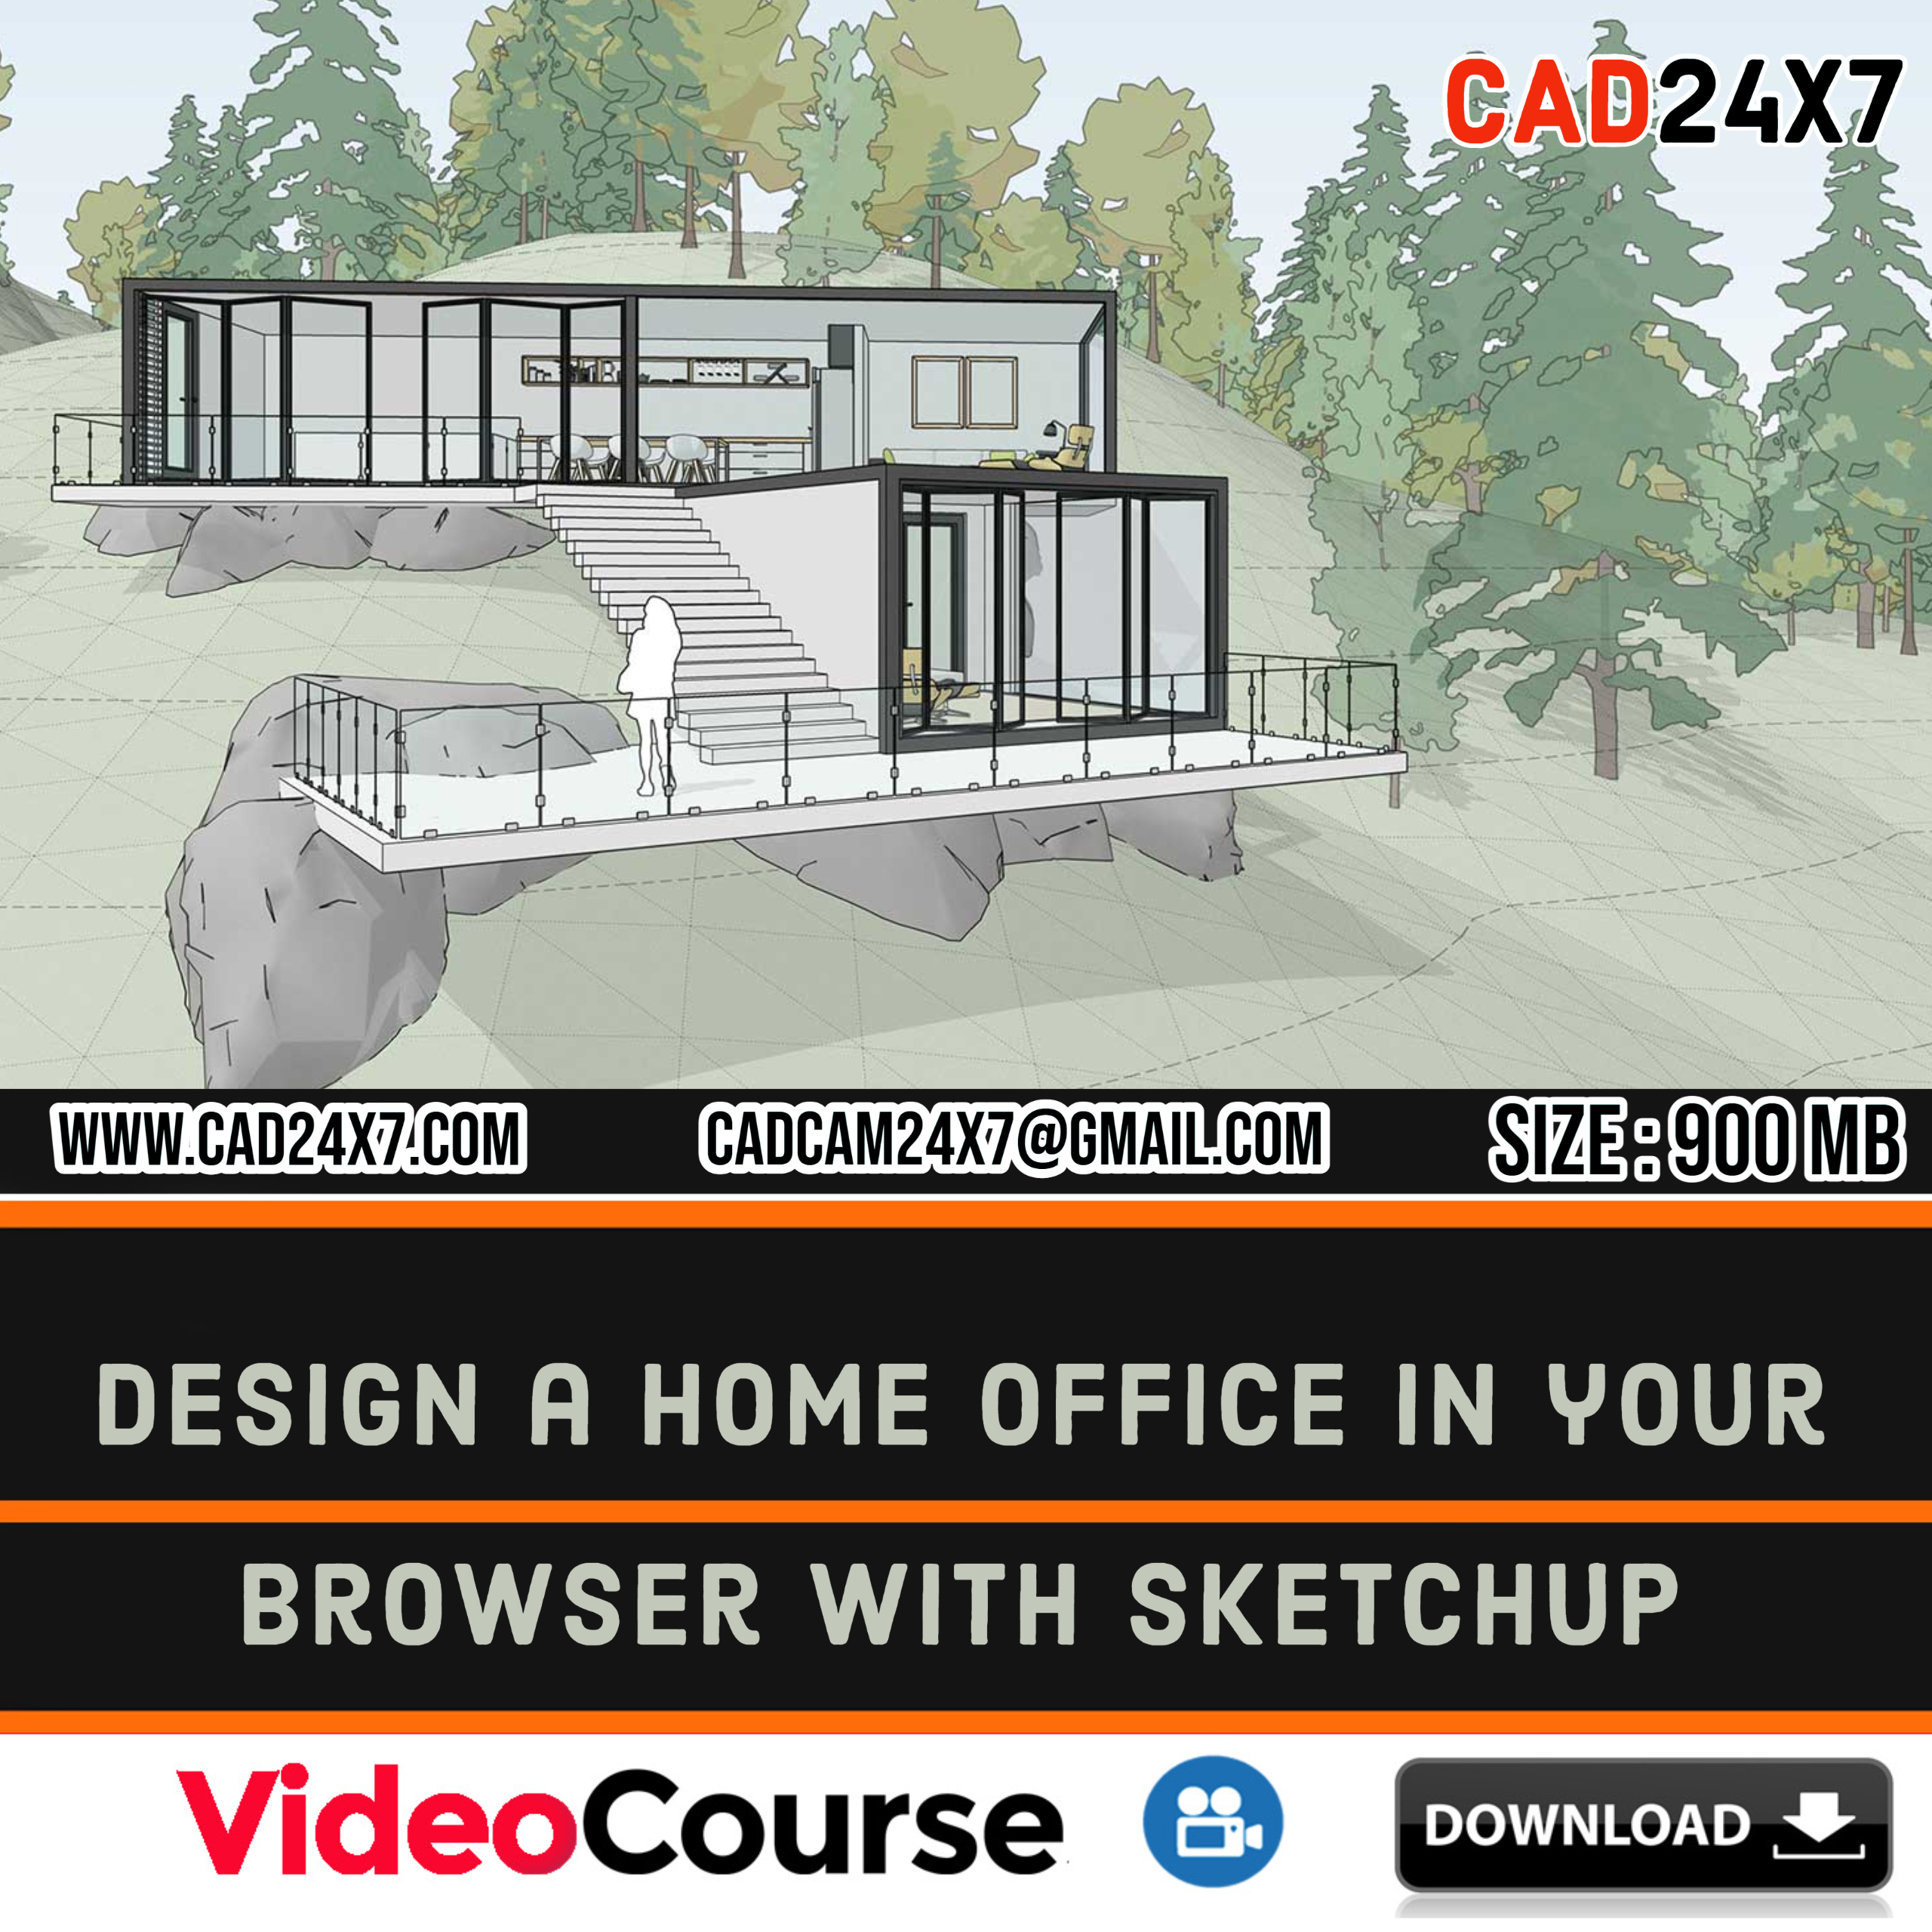 Design?a?Home?Office?in?your?Browser?with?Sketchup